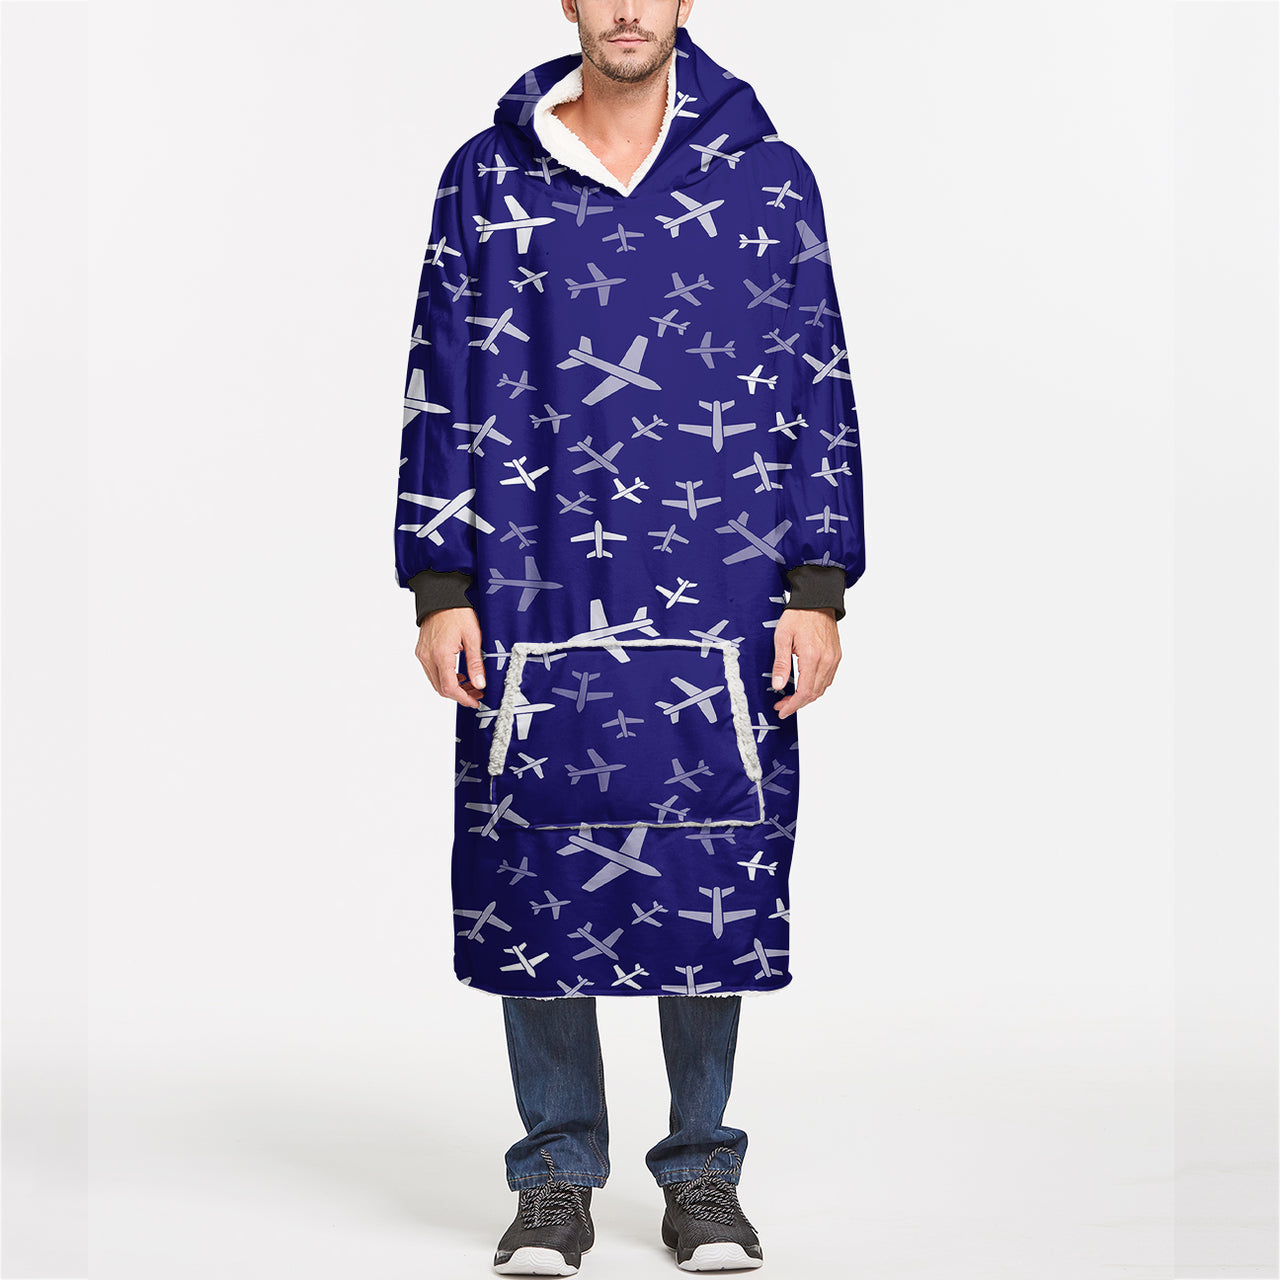 Different Sizes Seamless Airplanes Designed Blanket Hoodies